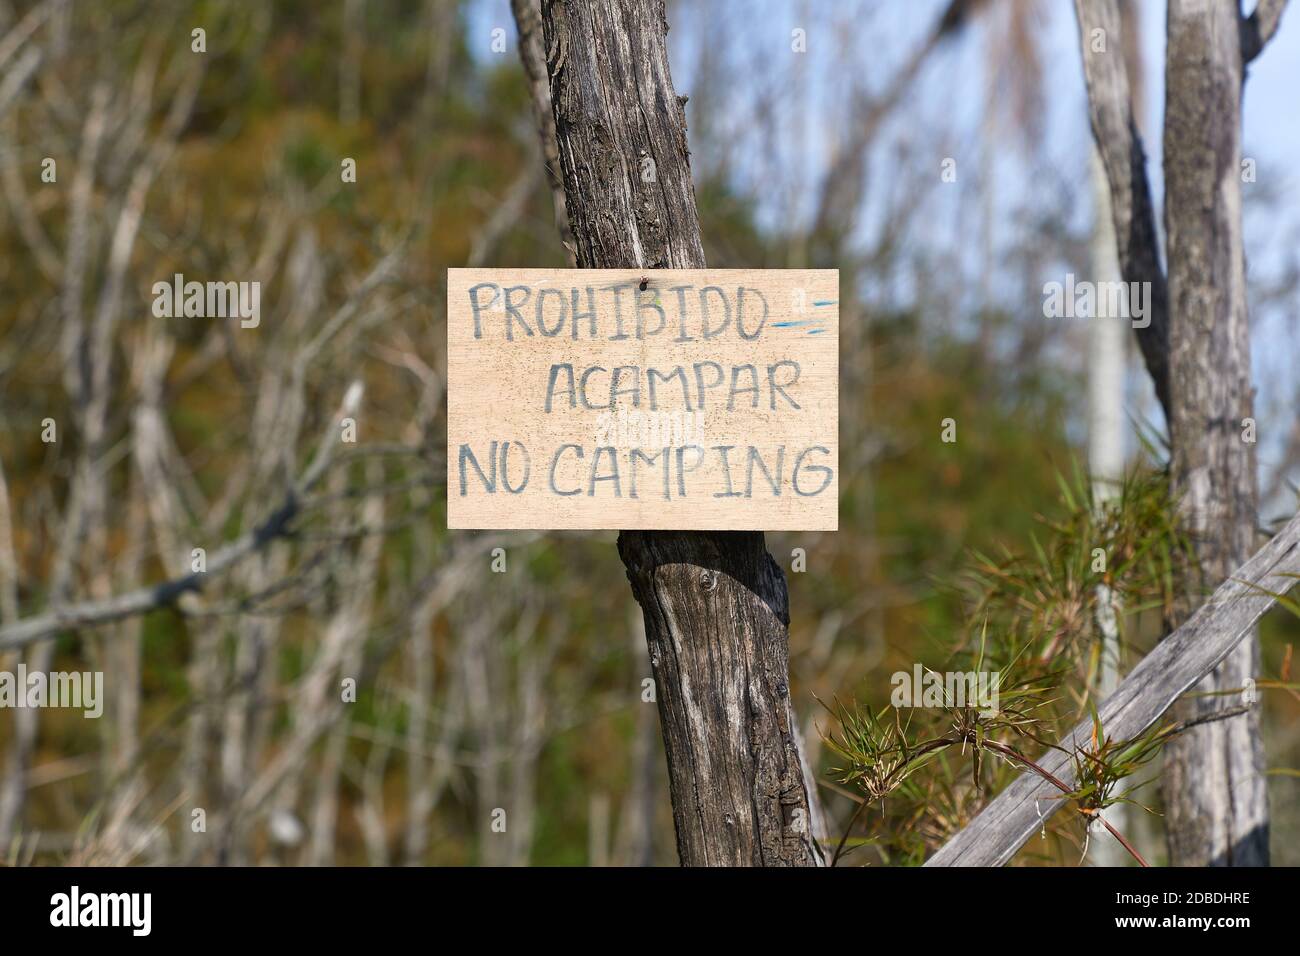 Signboard on a tree prohibiting camping, written in Spanish and English, Spanish text transplates to Camping prohibited Stock Photo